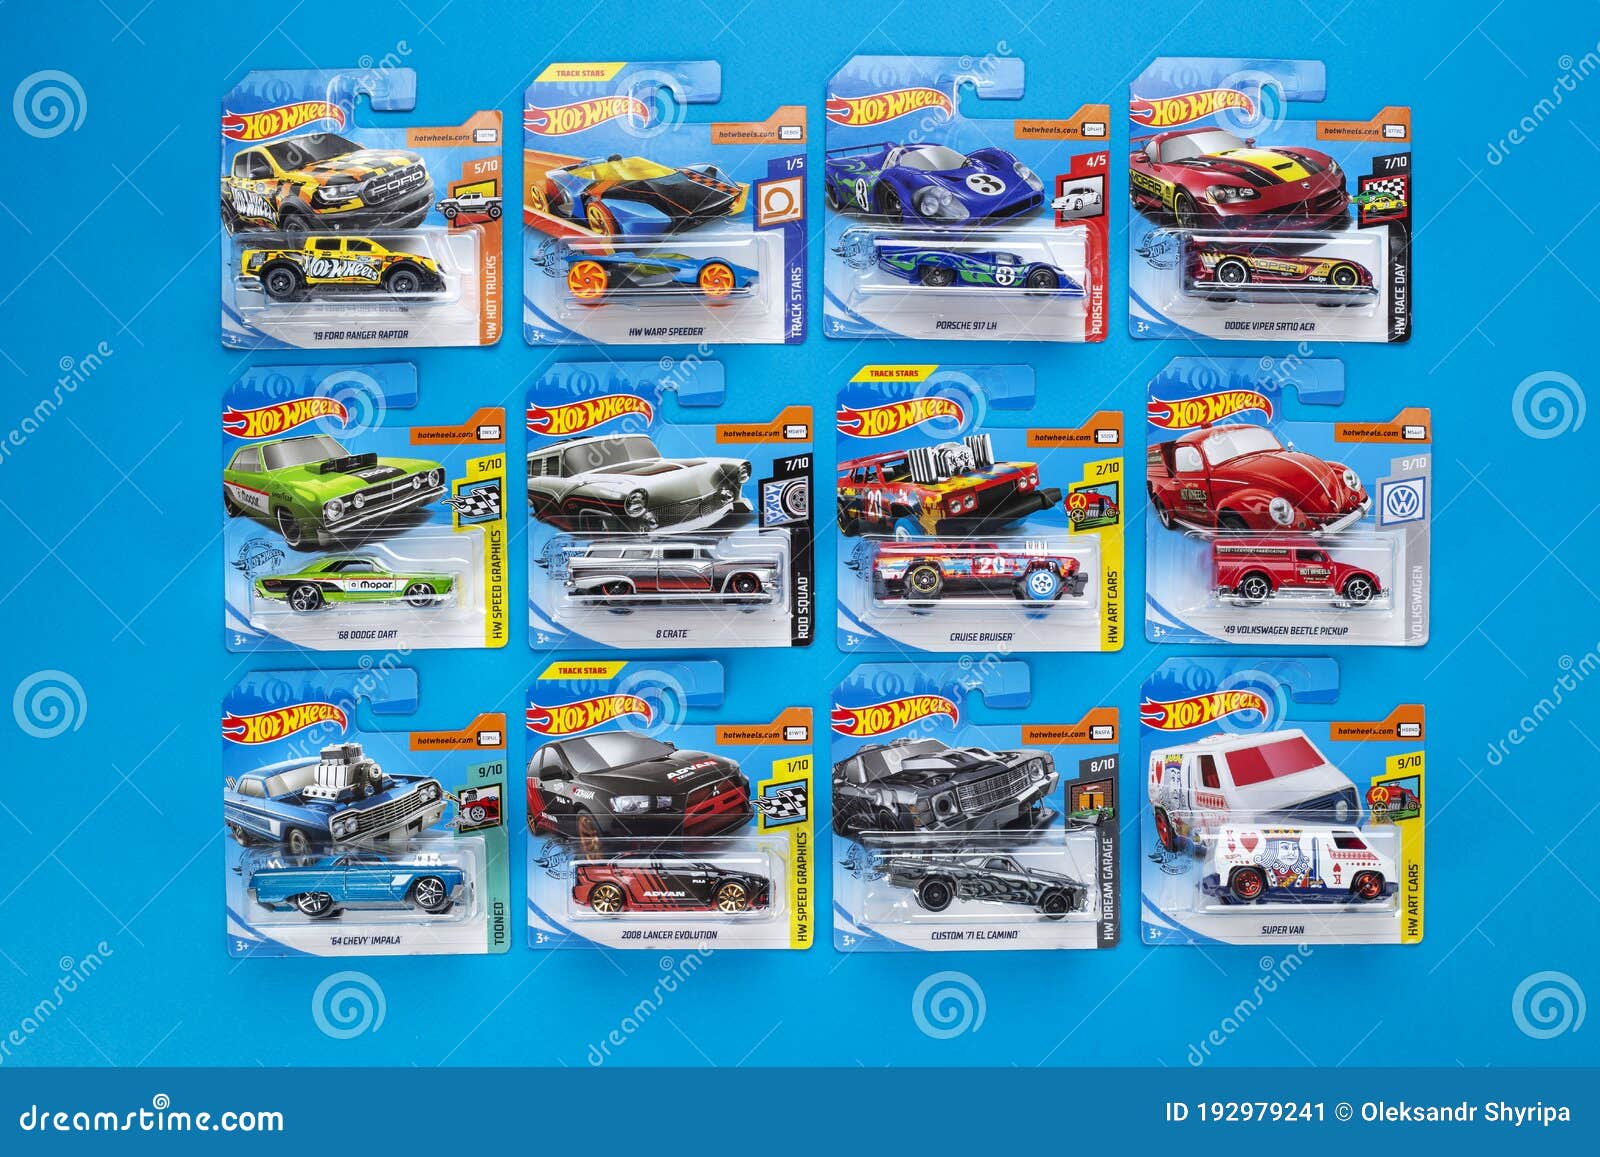 The Group of Colorful Toy Car Collection on Blue Background. Hot Wheels  Editorial Photo - Image of gamora, real: 192979241